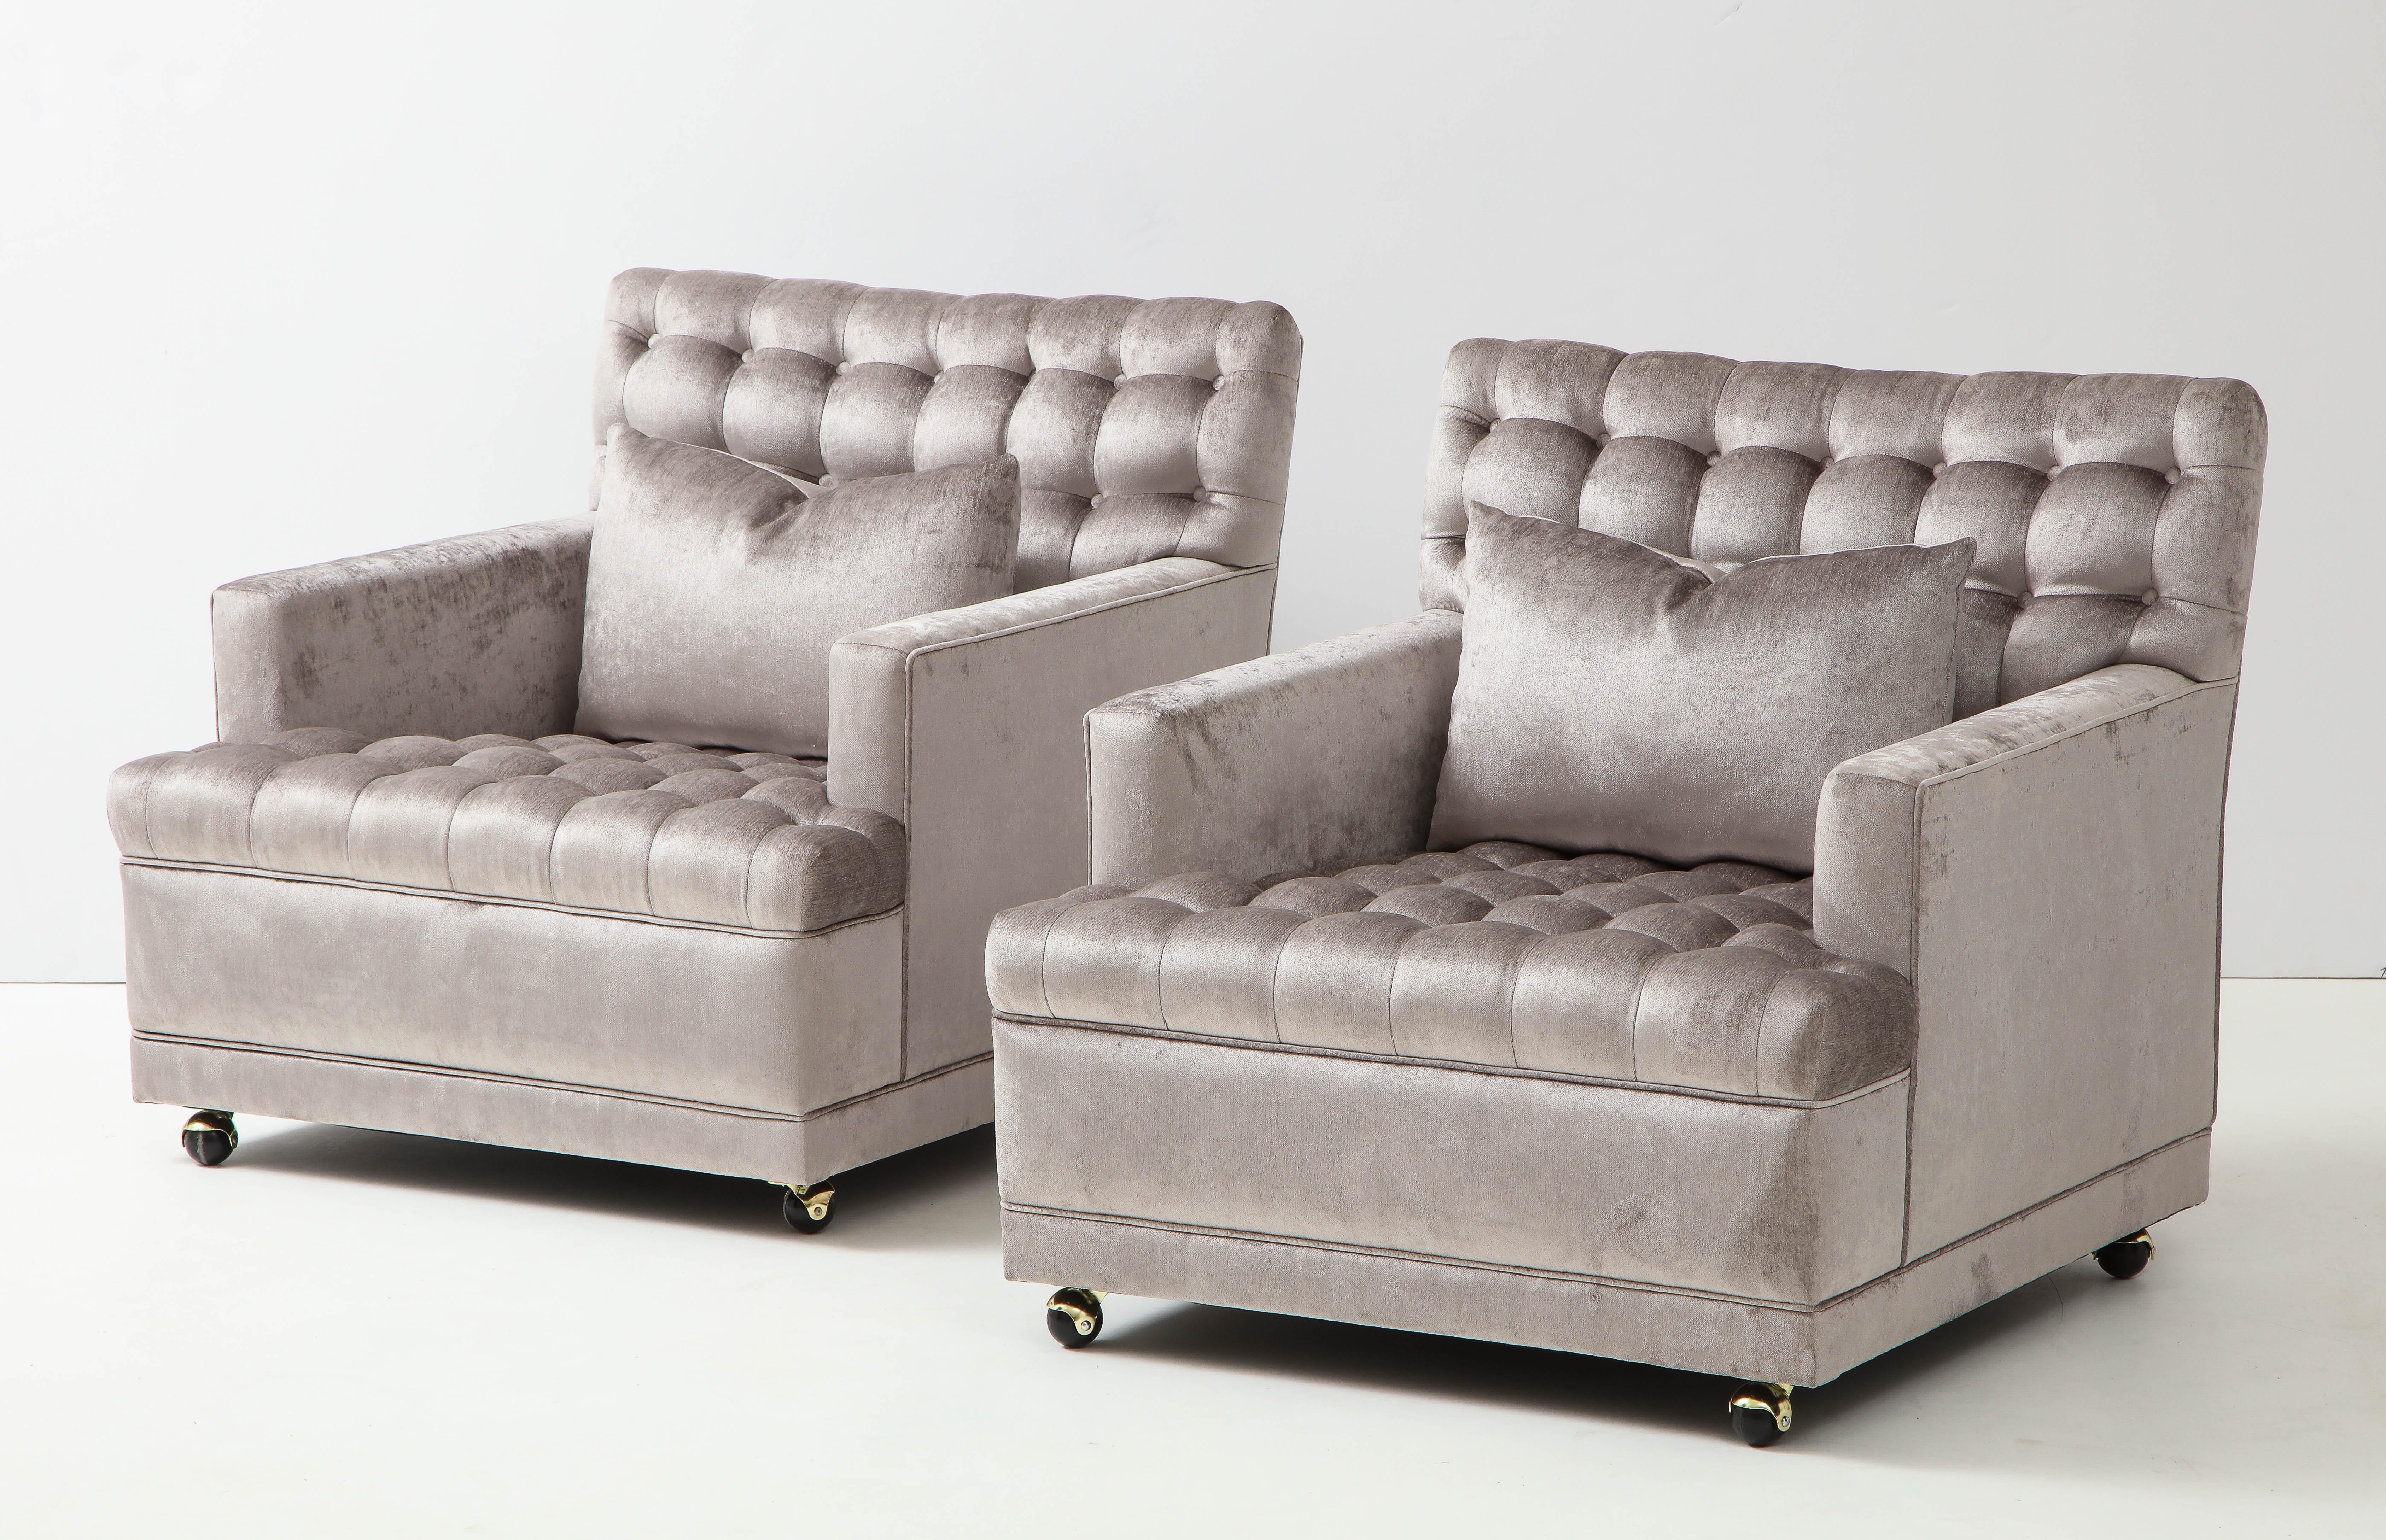 Pair of Biscuit Tufted Club Chairs. 2